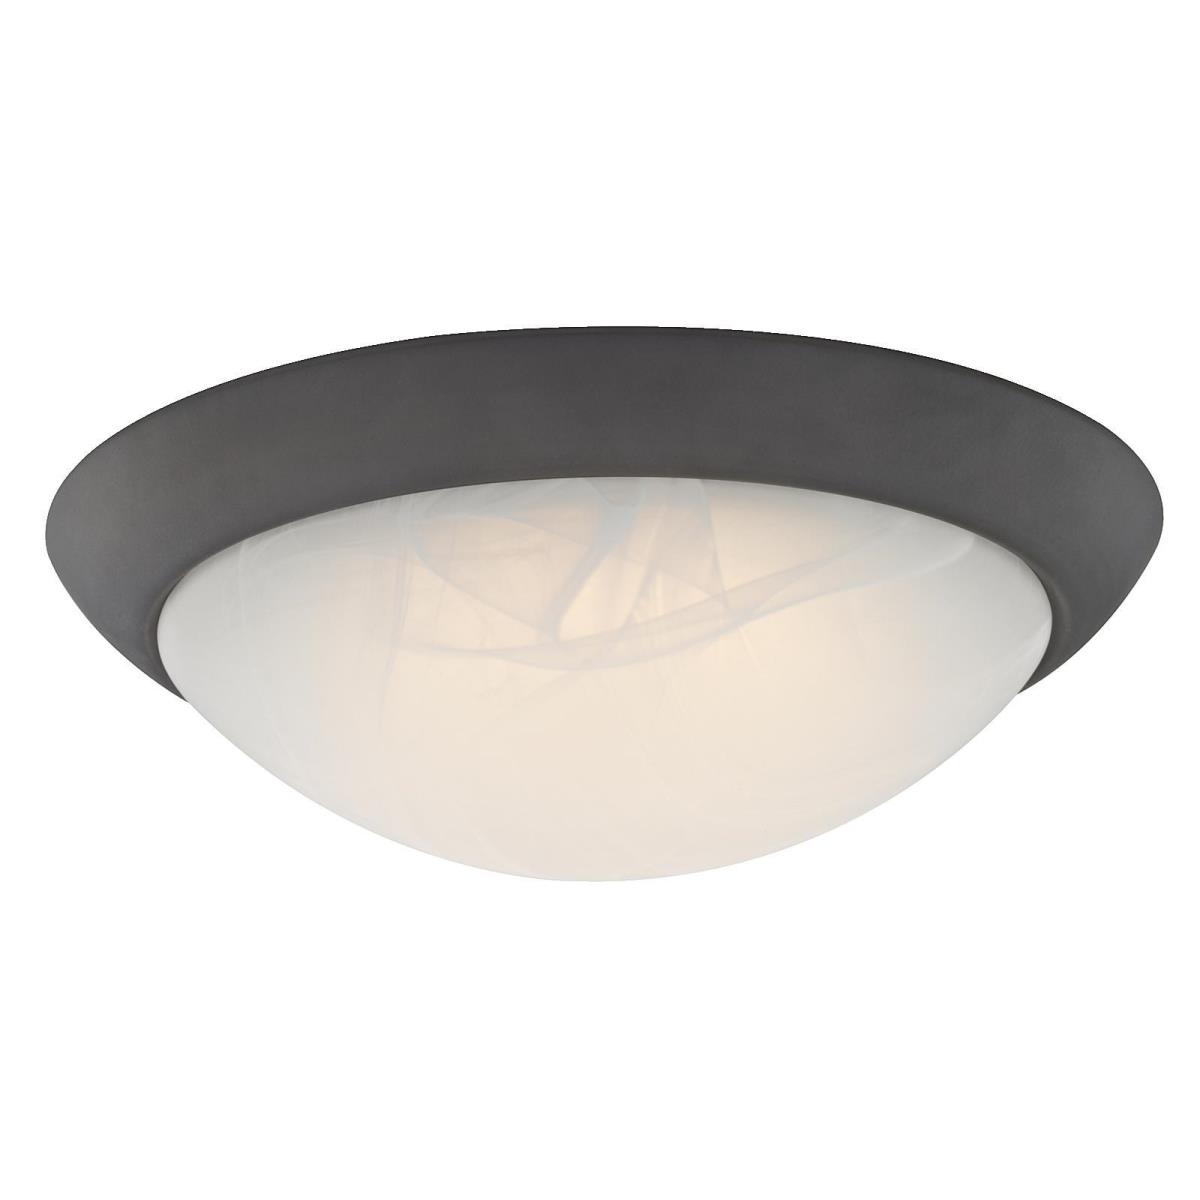 11" LED Flush Oil Rubbed Bronze Finish with White Alabaster Glass